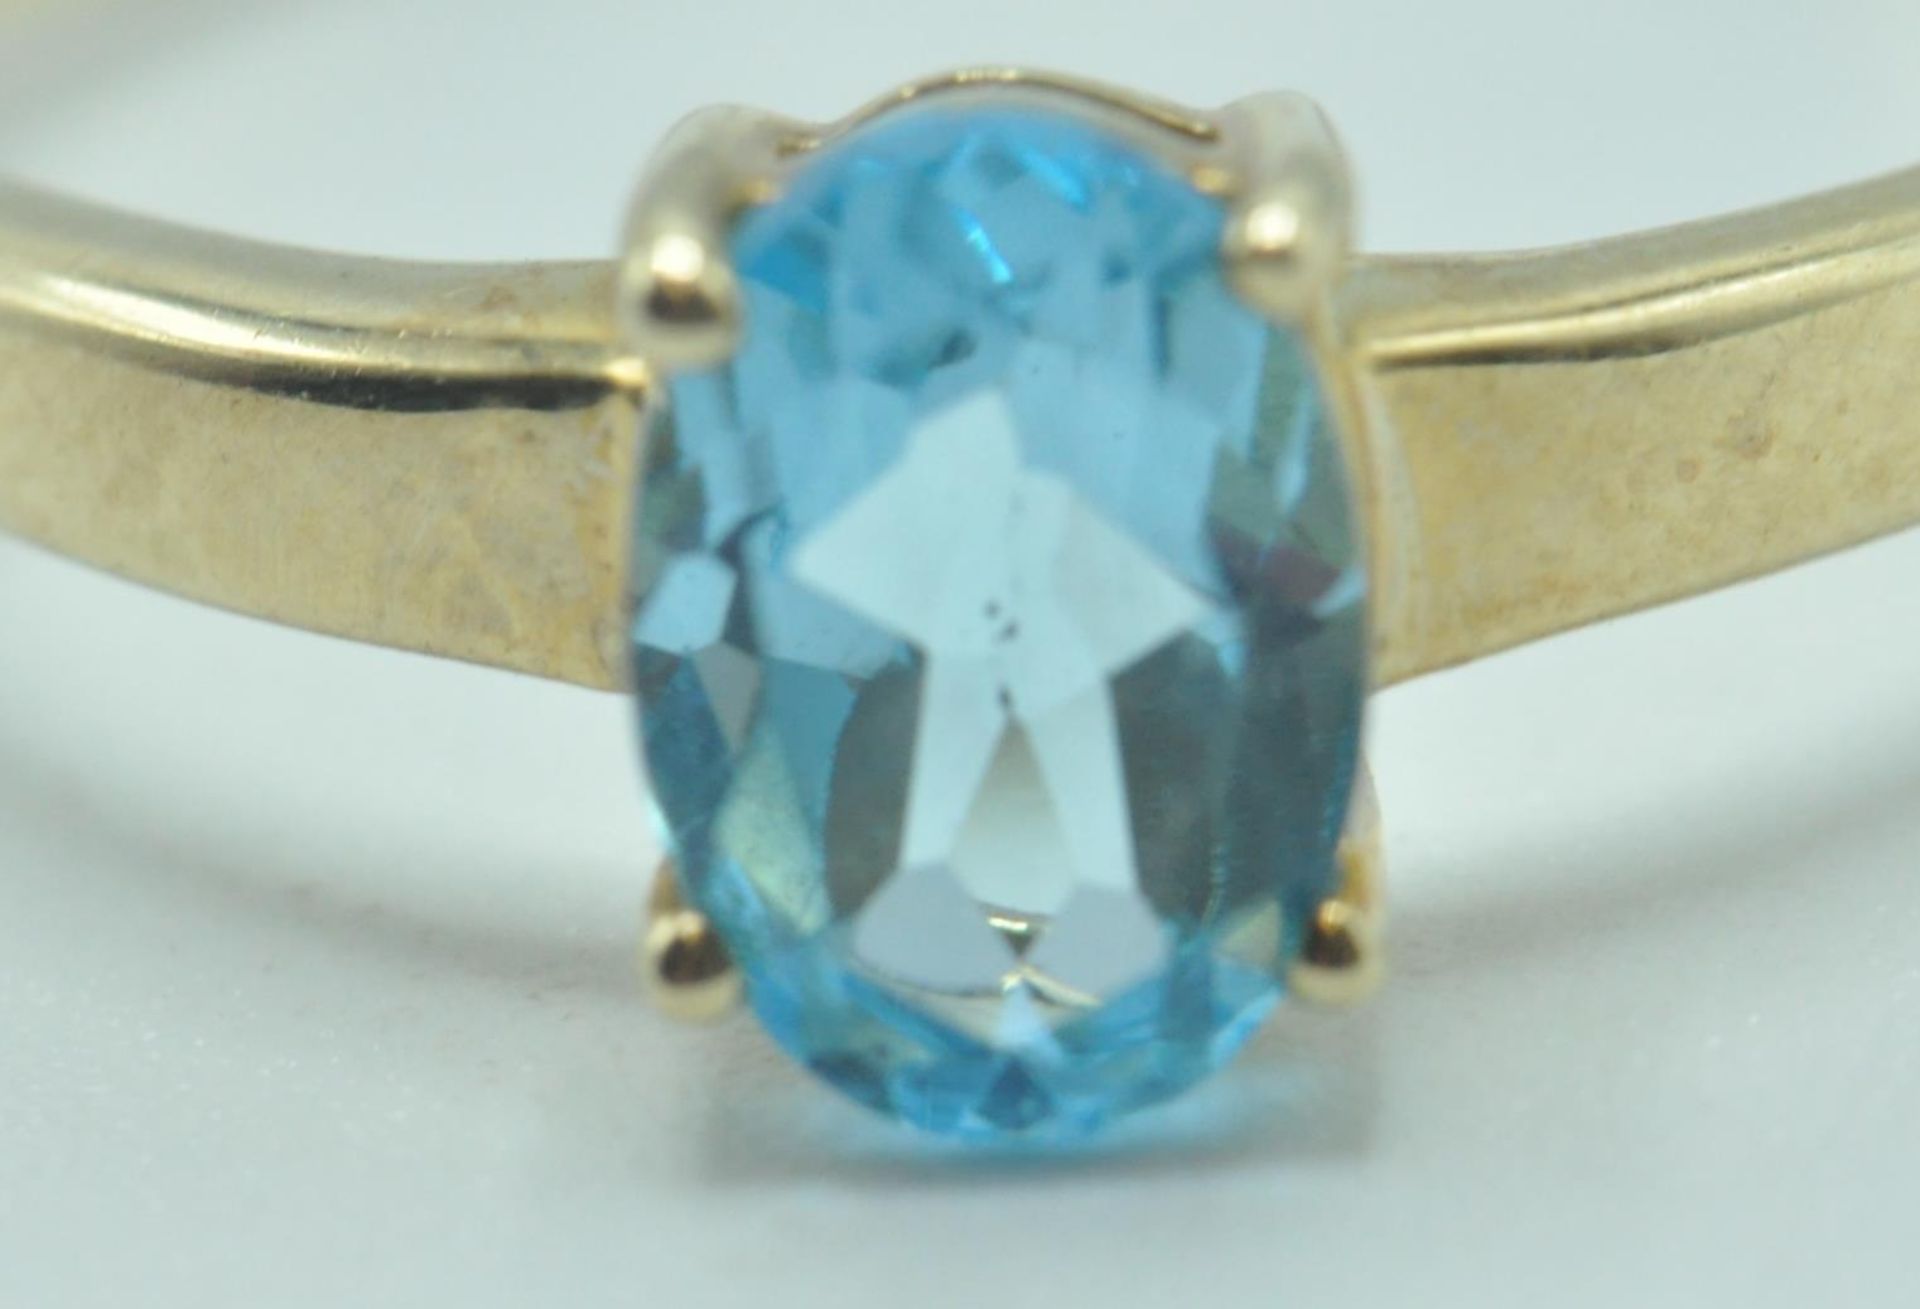 9CT GOLD AND BLUE STONE SOLITAIRE RING - Image 2 of 6